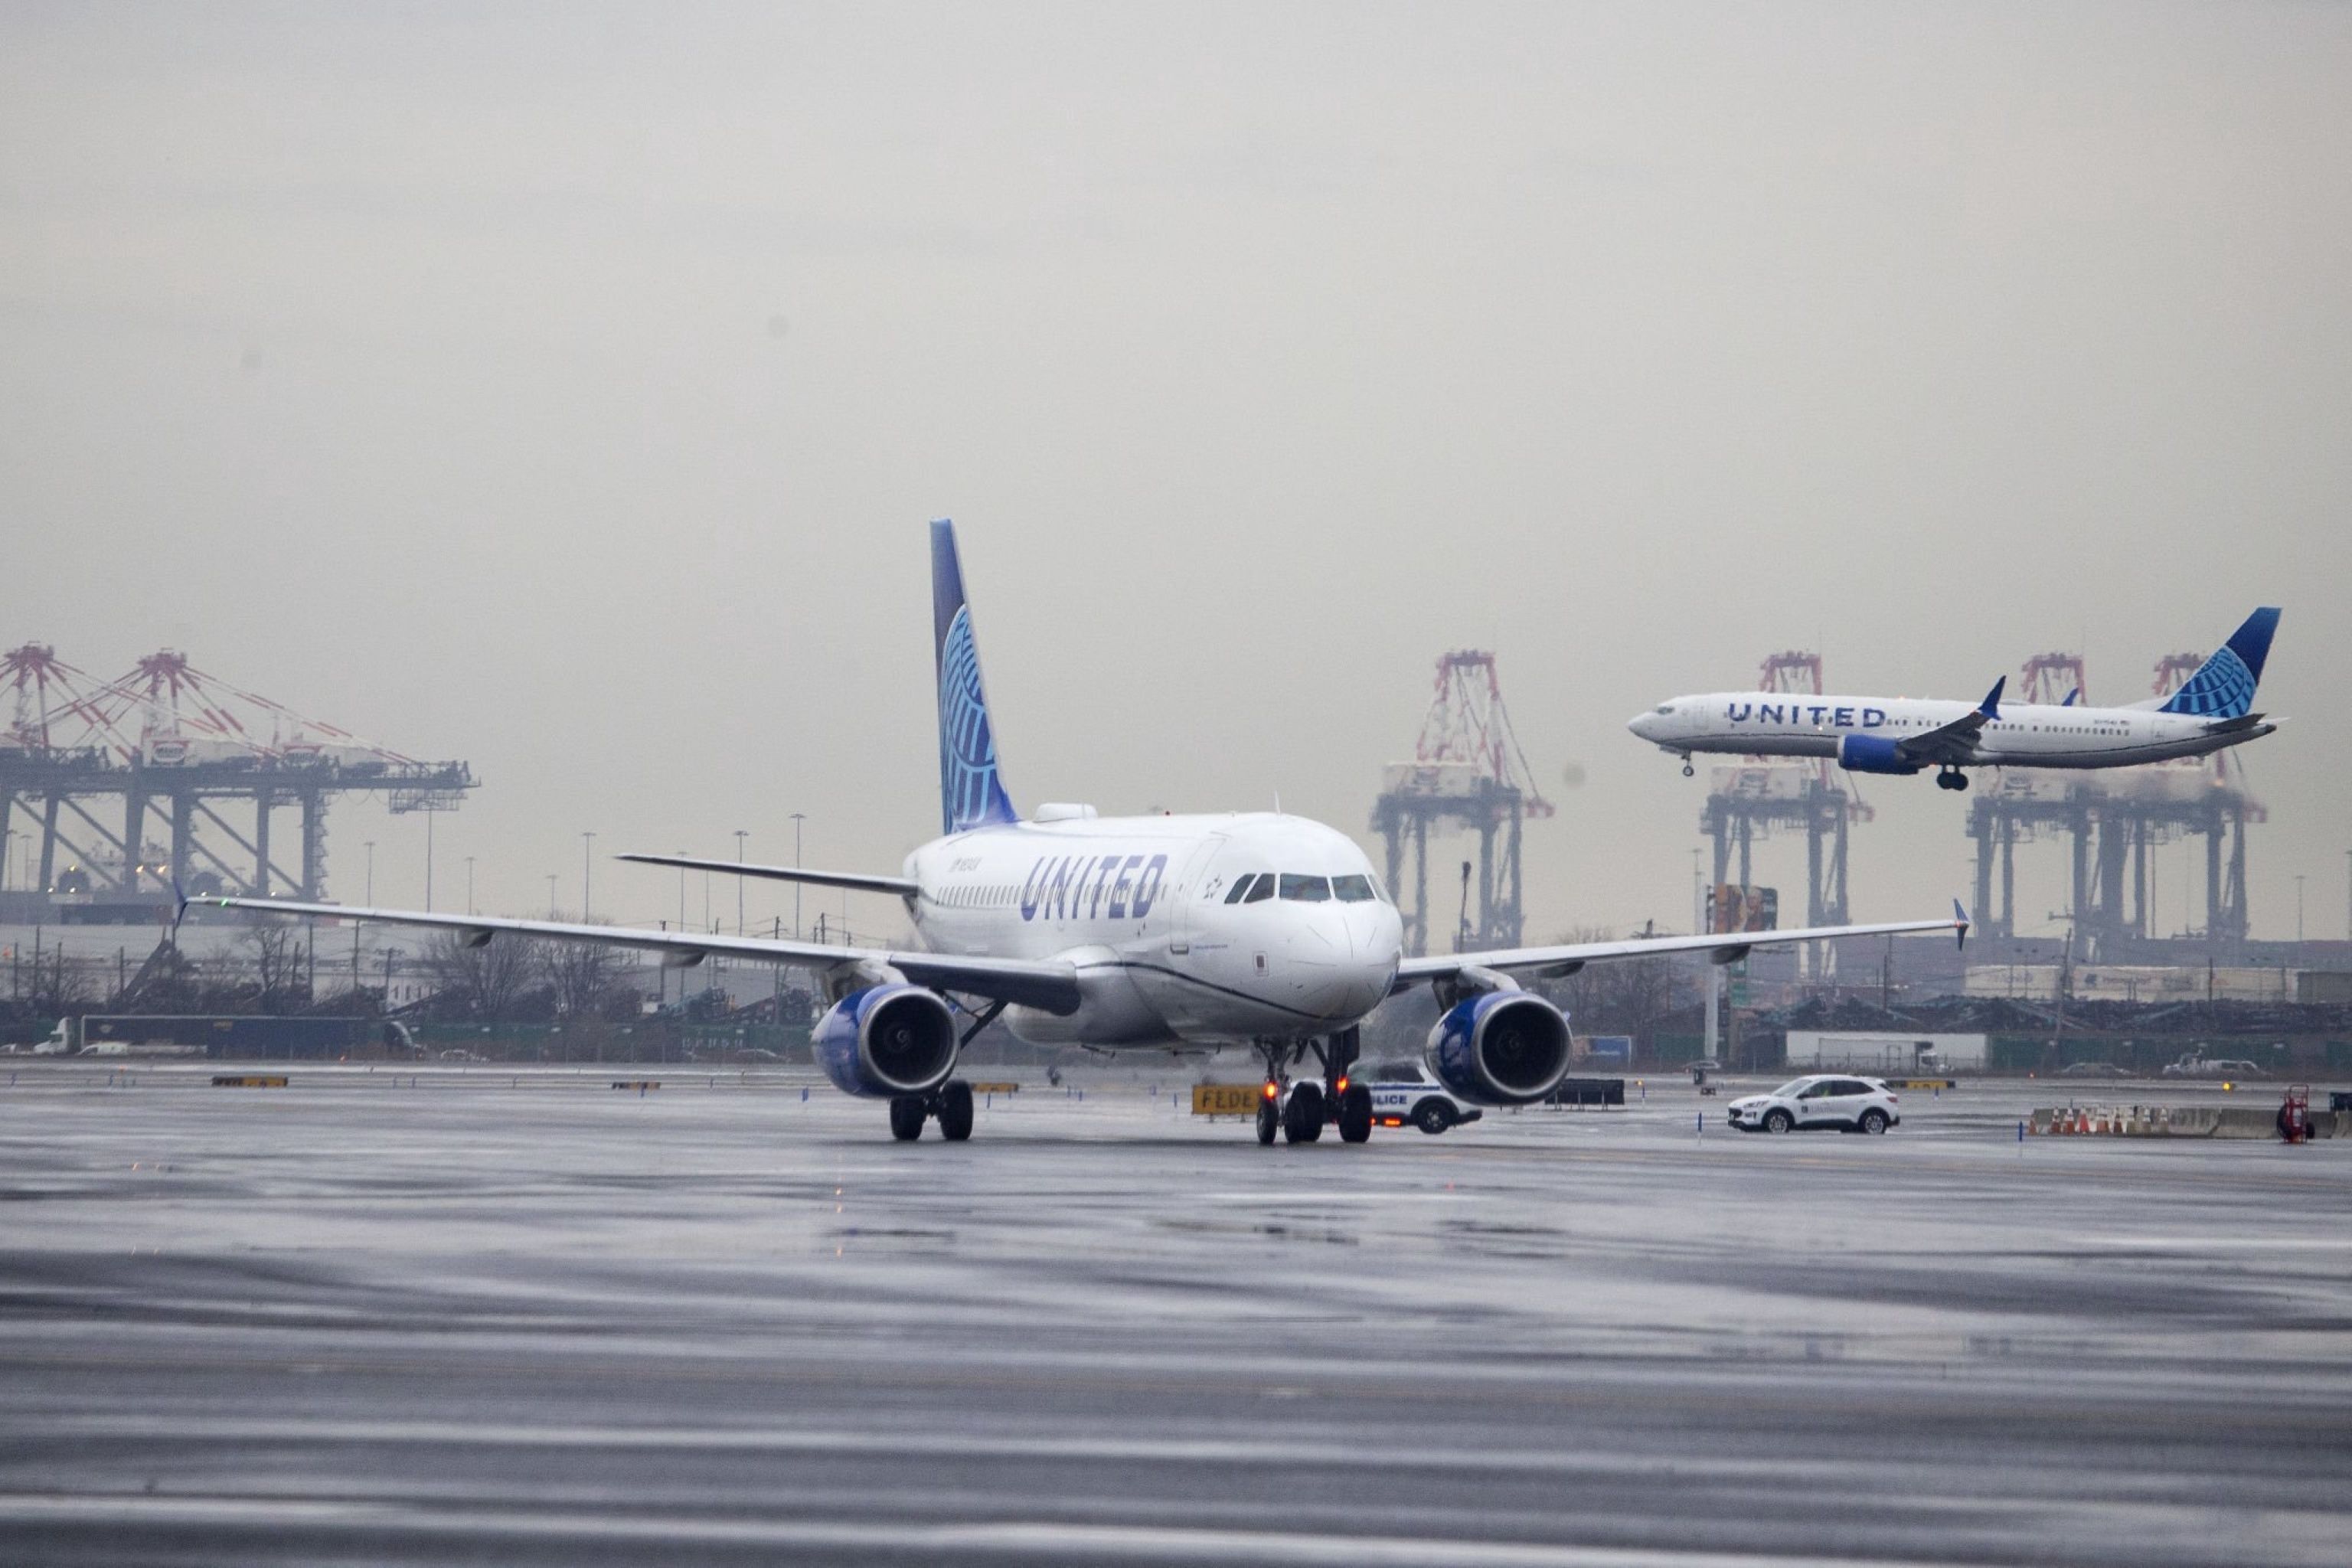 Two United Airlines aircraft at Newark Airport 